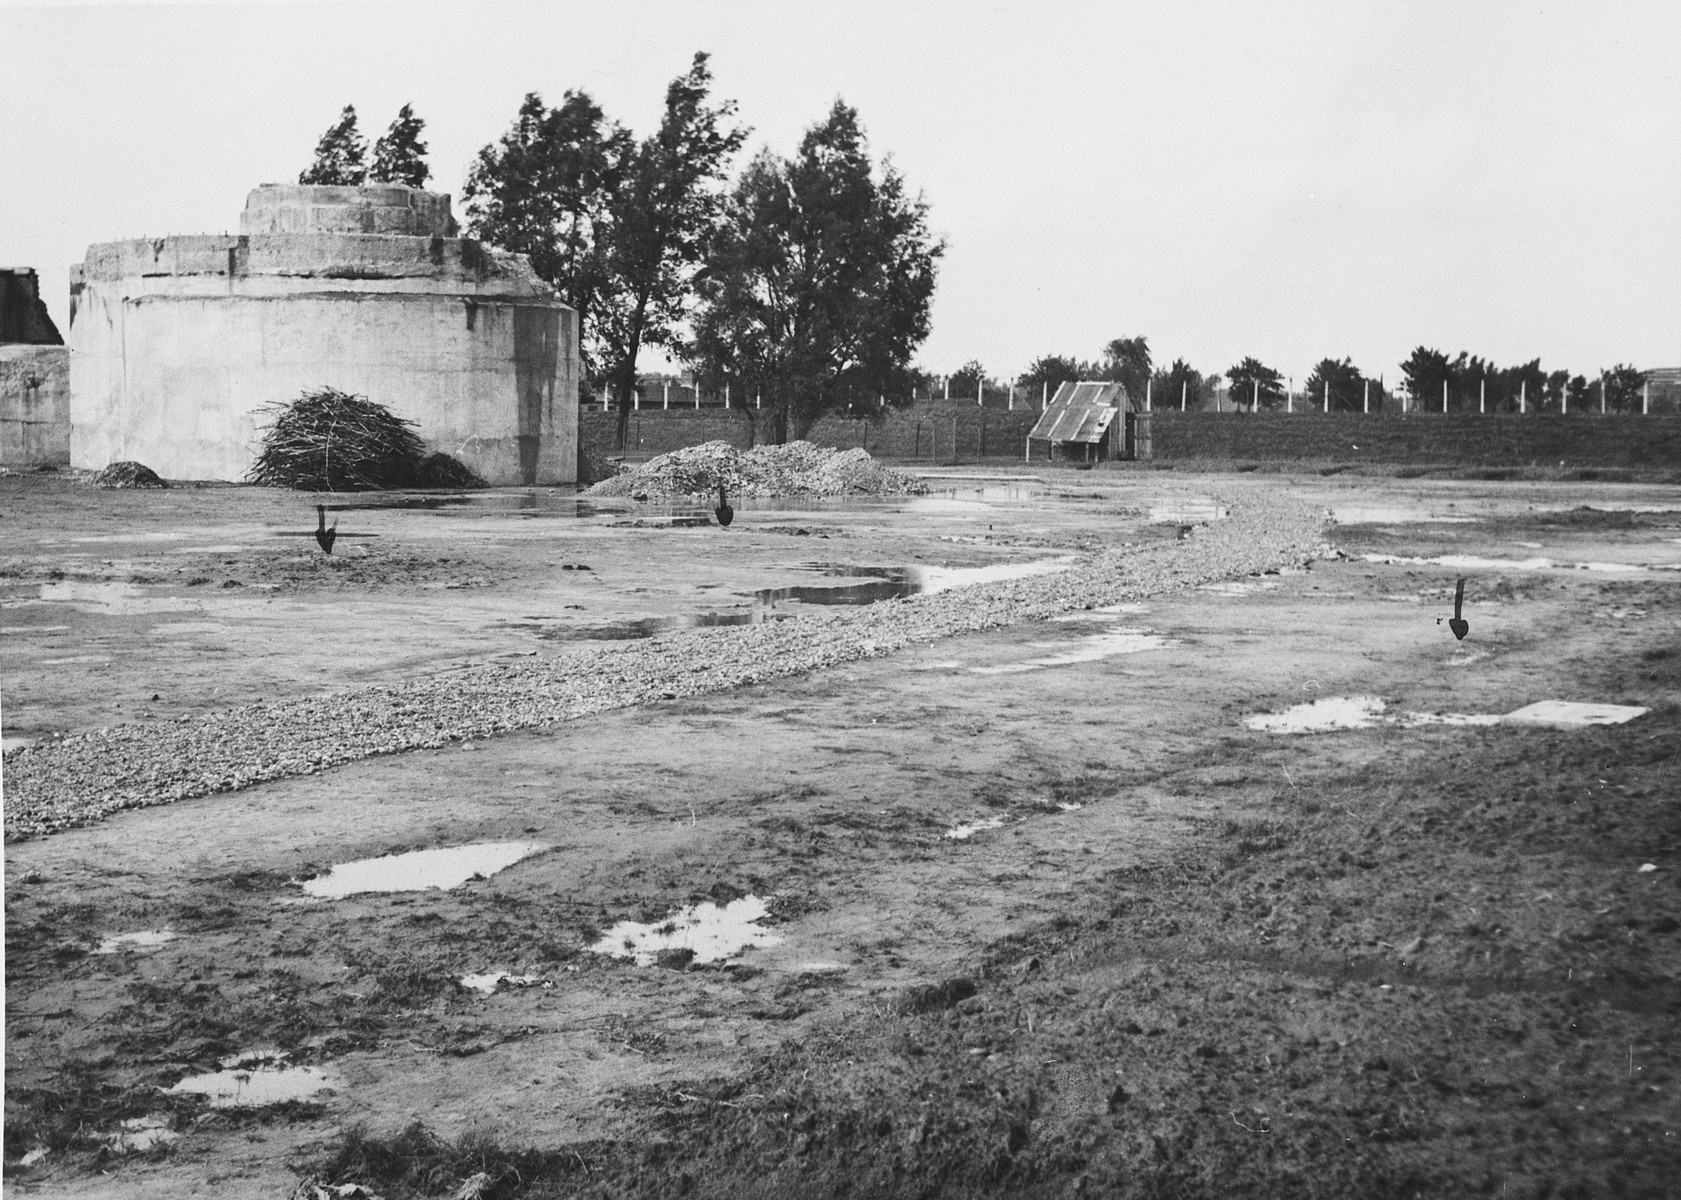 View of the prison yard in the Breendonck concentration camp.

The orginal caption reads, "The red arrows indicate soft earth which has been dug up to find whether or not any bodies were buried there.  Nothing was found."